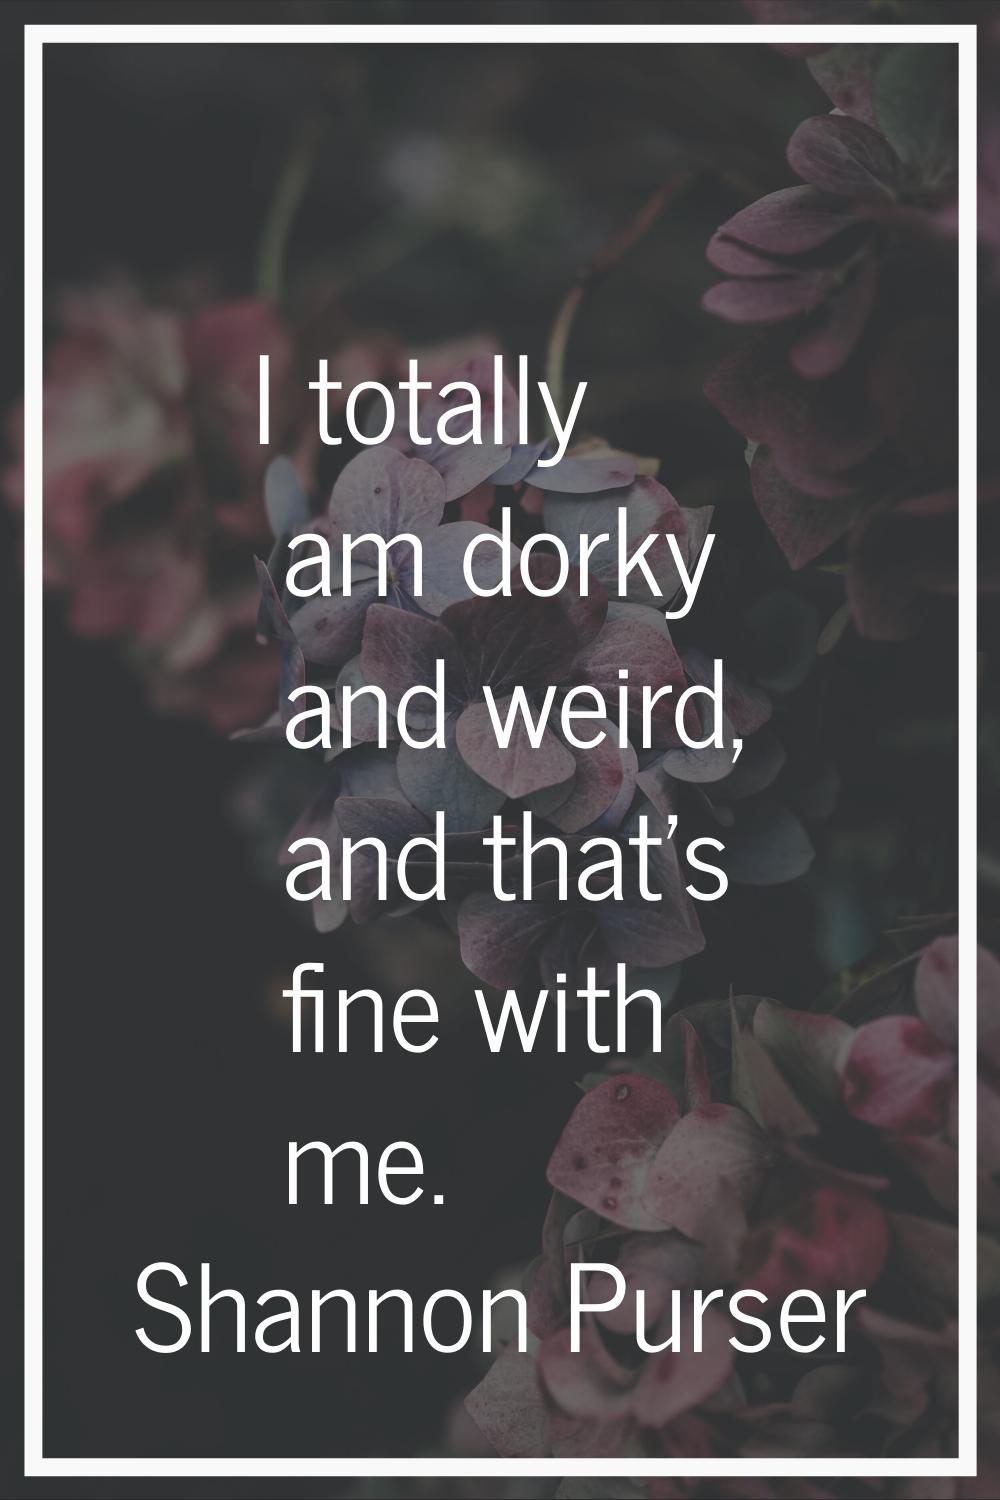 I totally am dorky and weird, and that's fine with me.